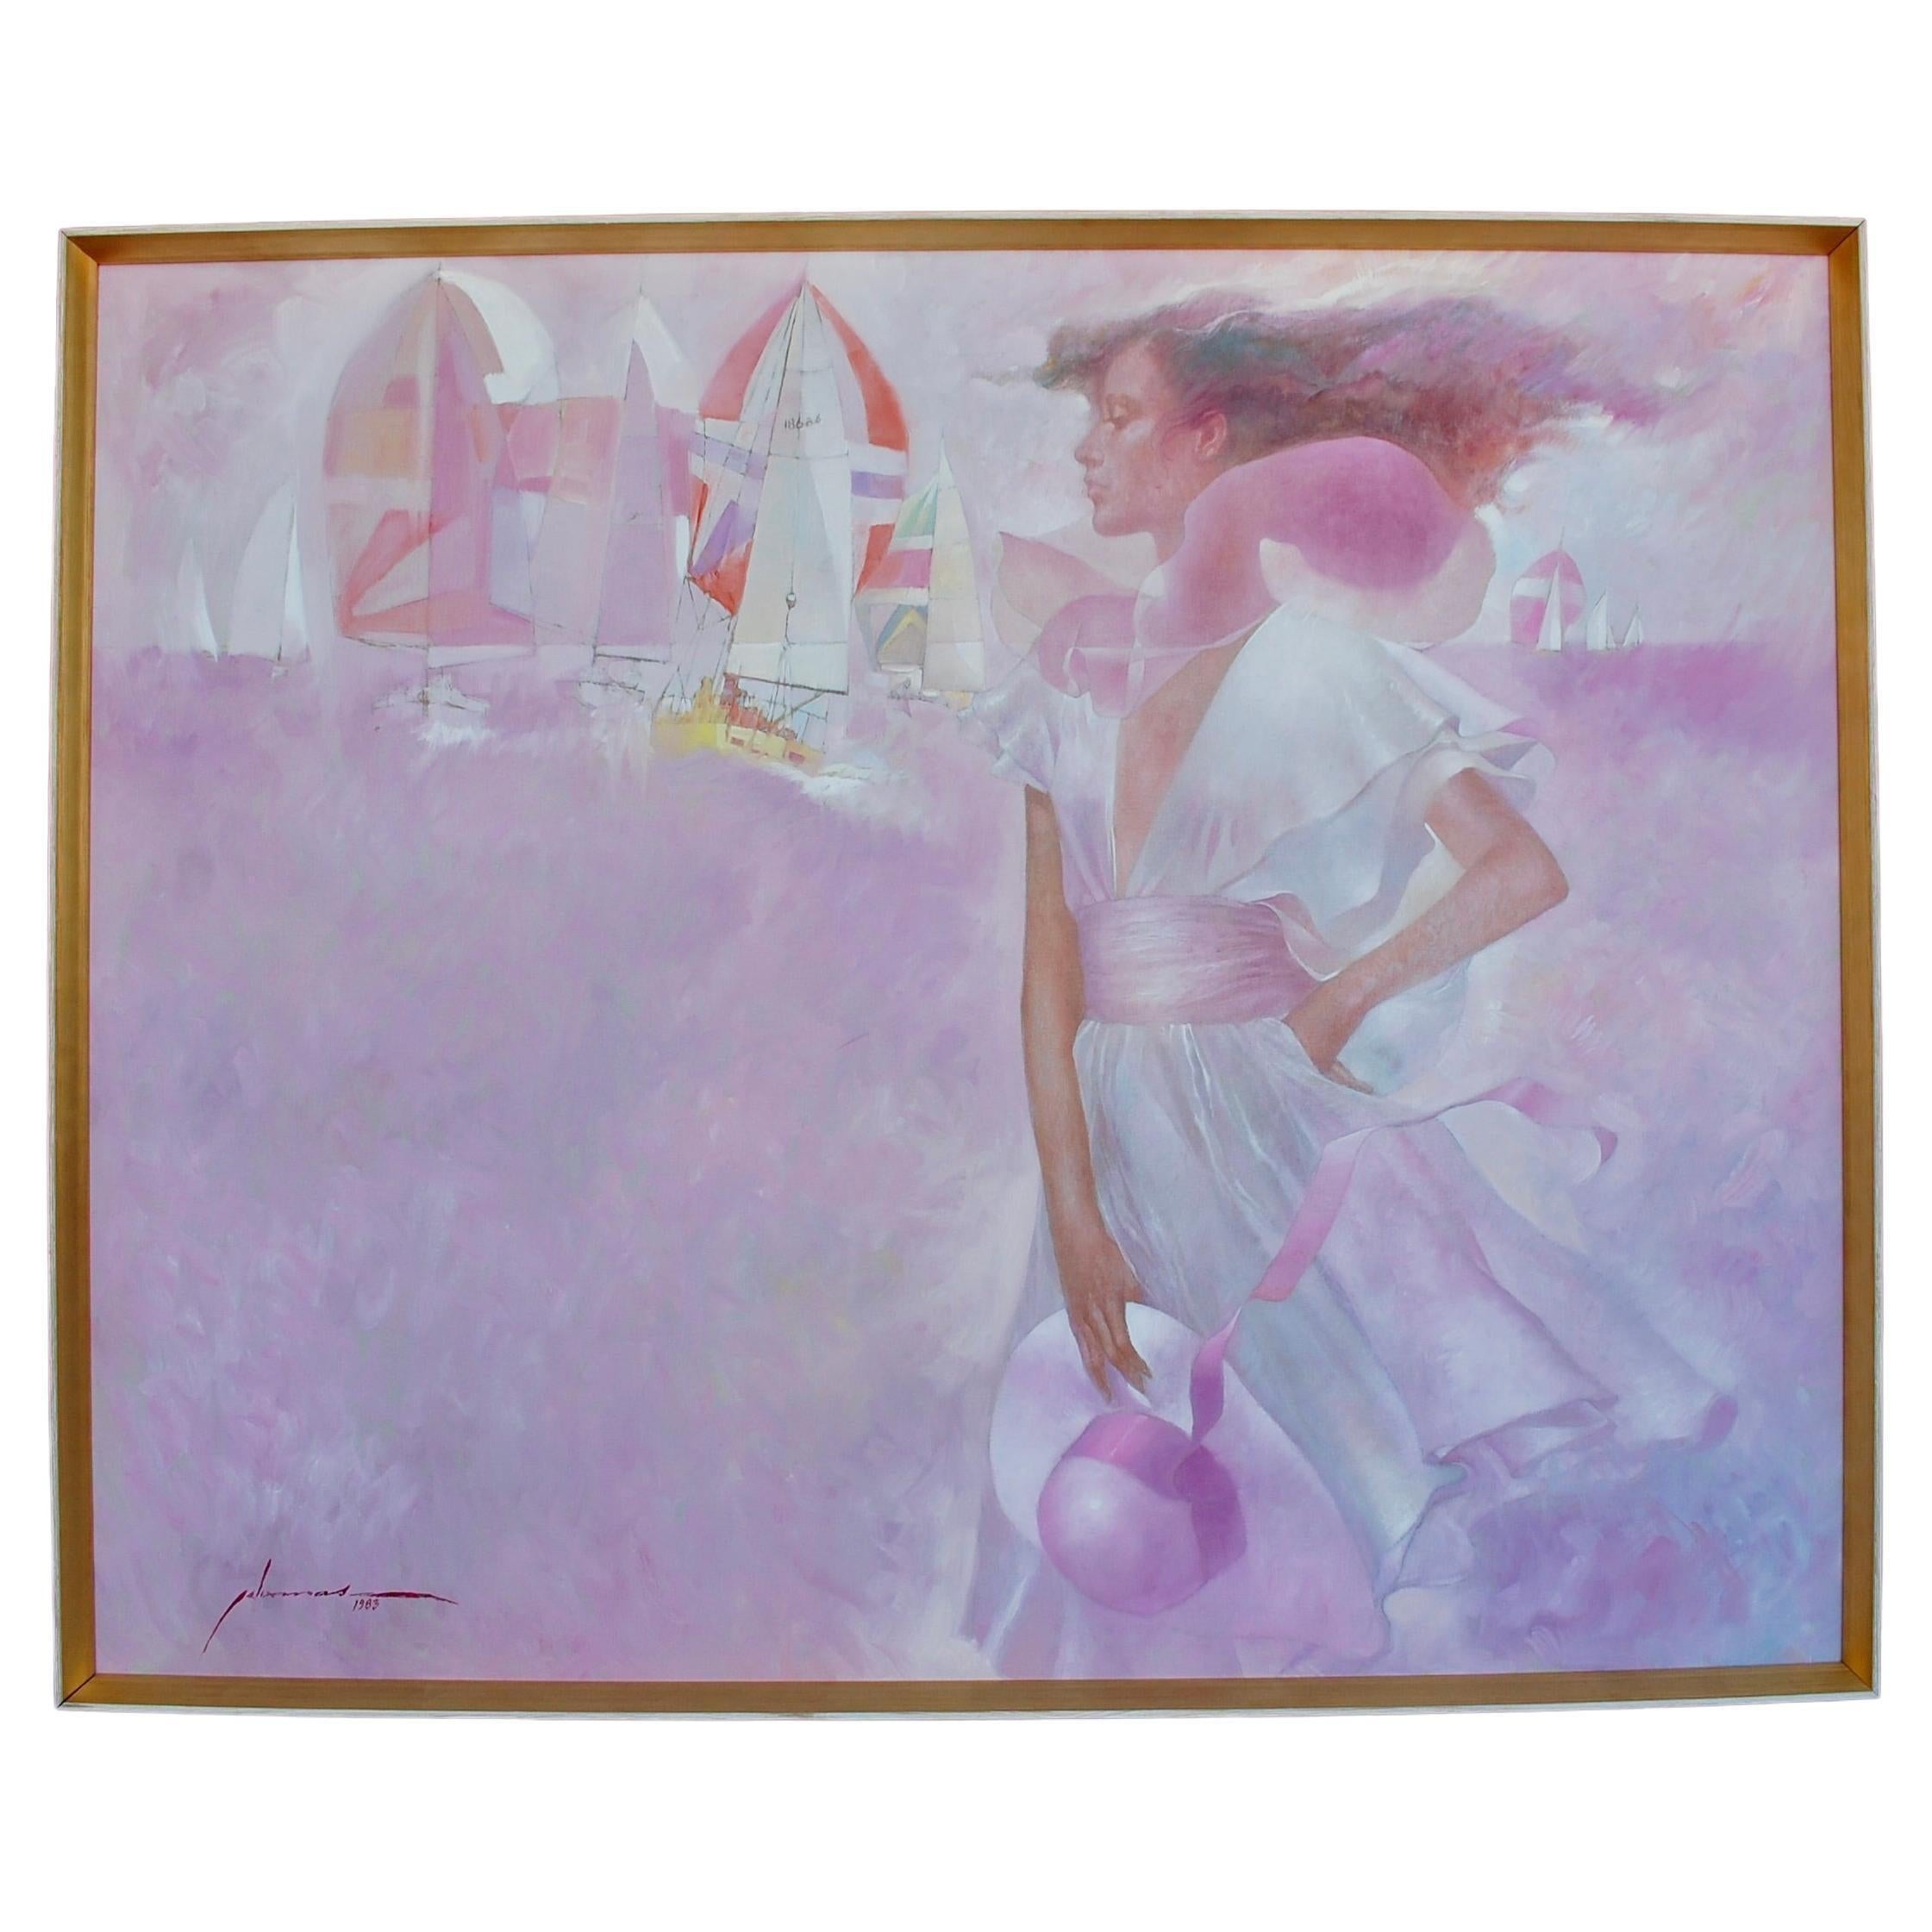  Felix Mas Figurative Painting - Marina Large Pink Oil Painting With Woman and Sail Boats